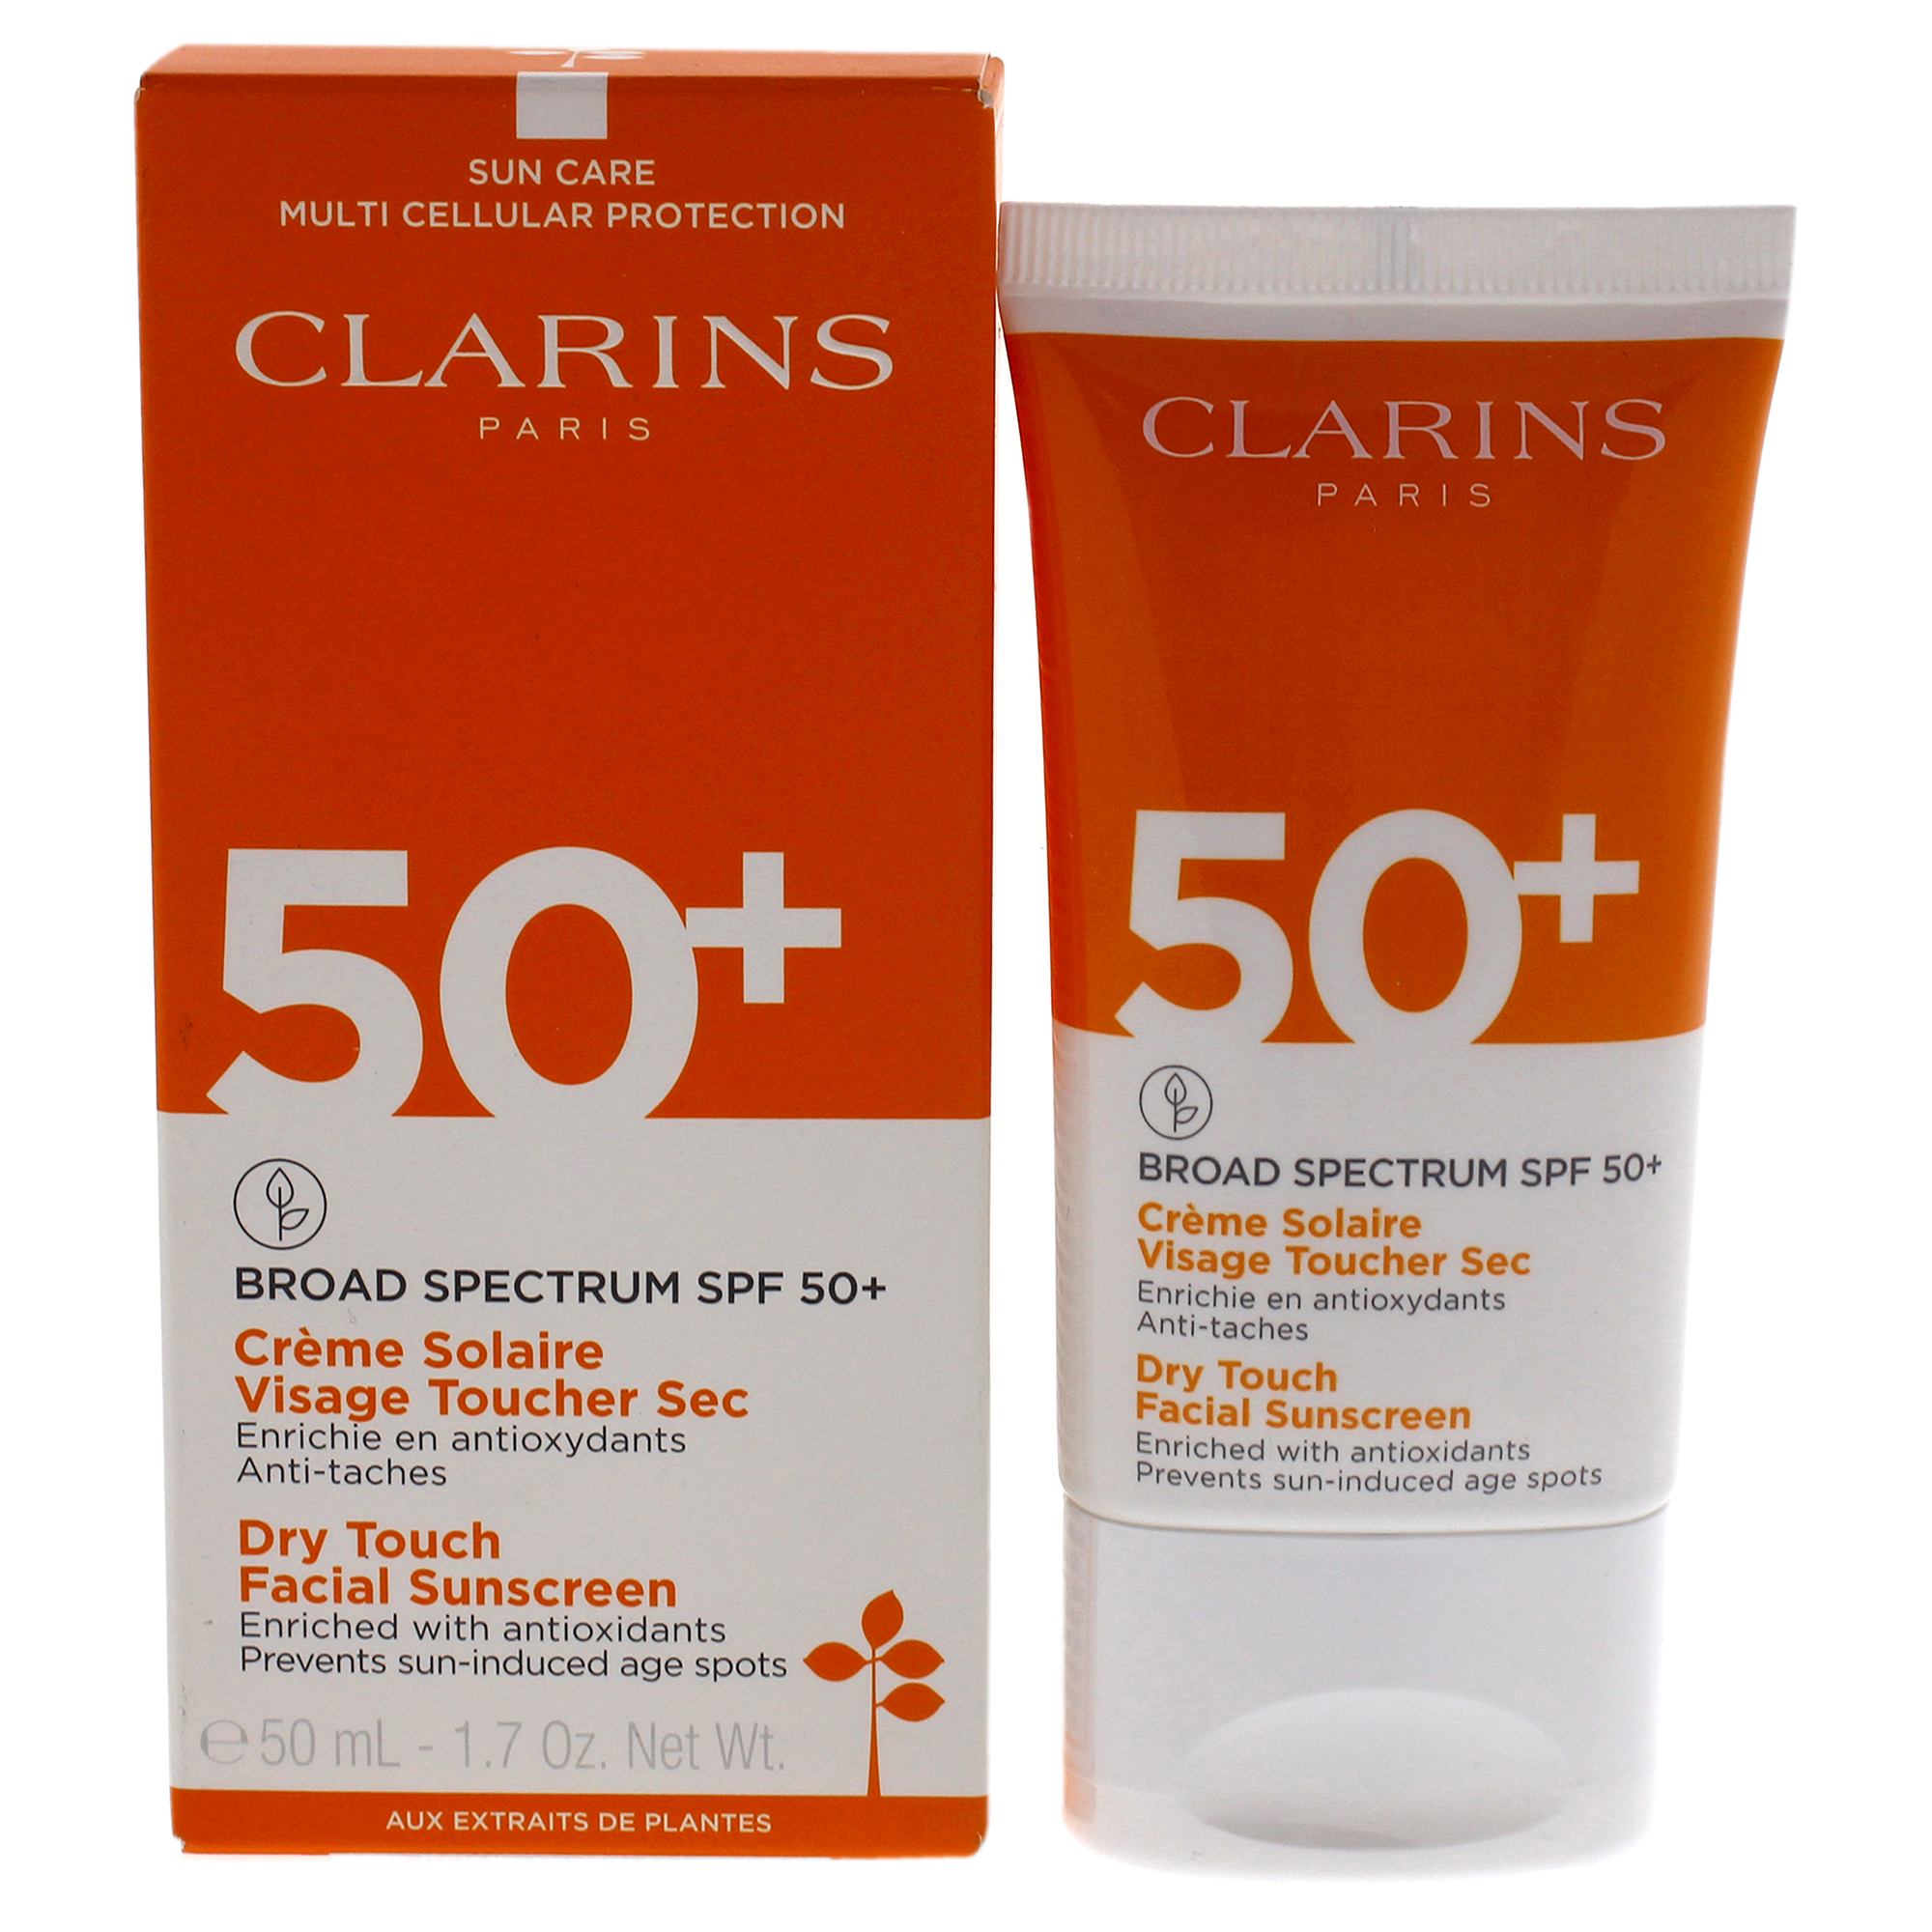 Clarins Unisex Dry Touch Facial Sunscreen Cream 1.7 oz Skin Care 3380810304886 In Beige